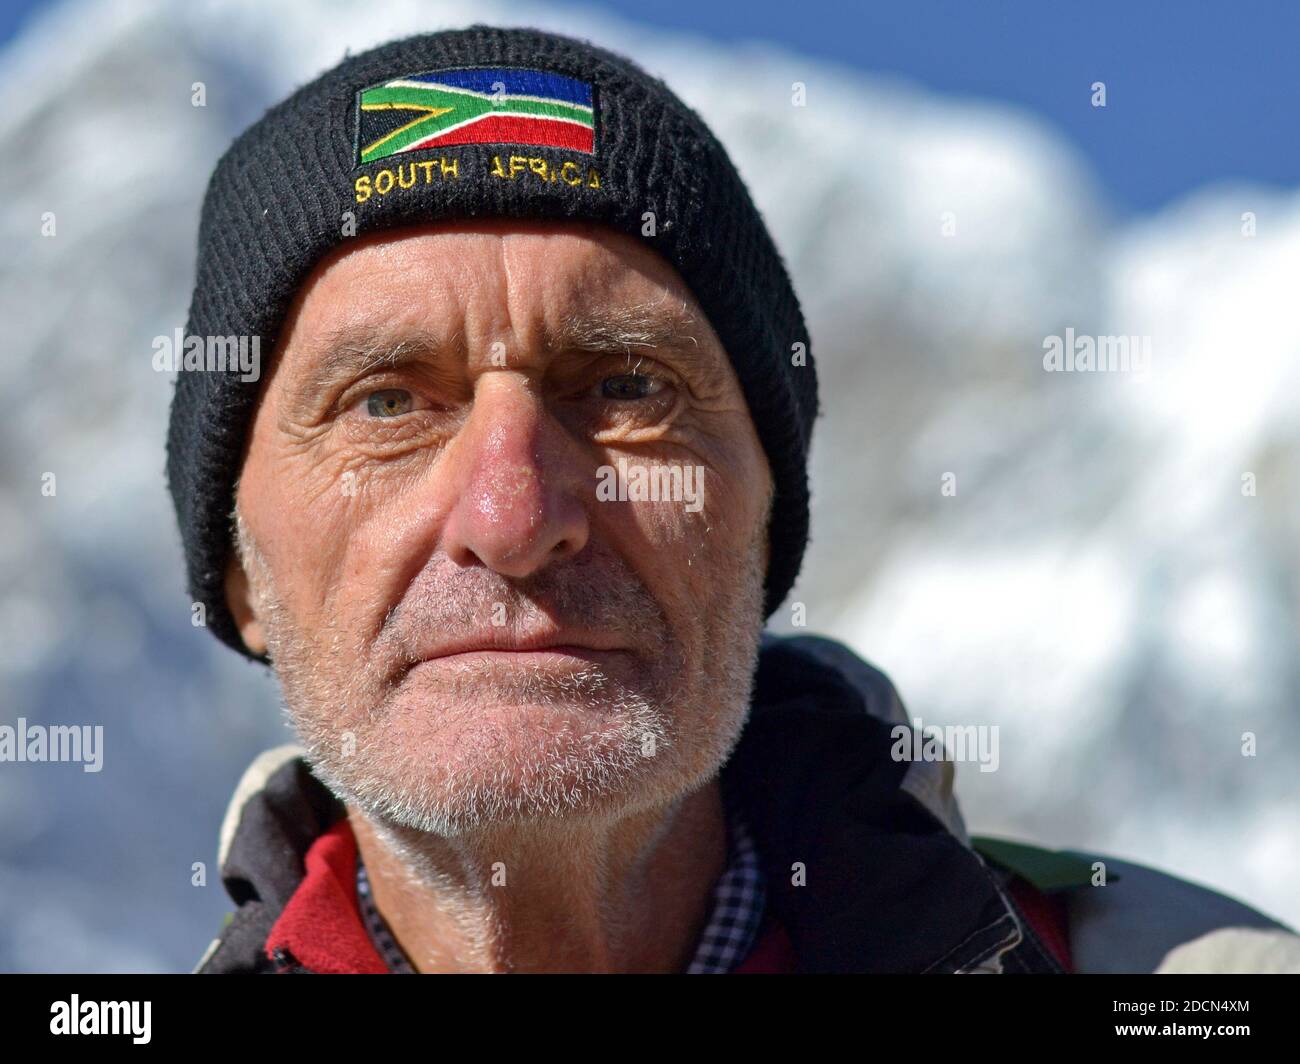 Elderly unshaved Caucasian male trekker with South African flag on woolen cap poses for the camera at Gorak Shep near Everest Base Camp. Stock Photo